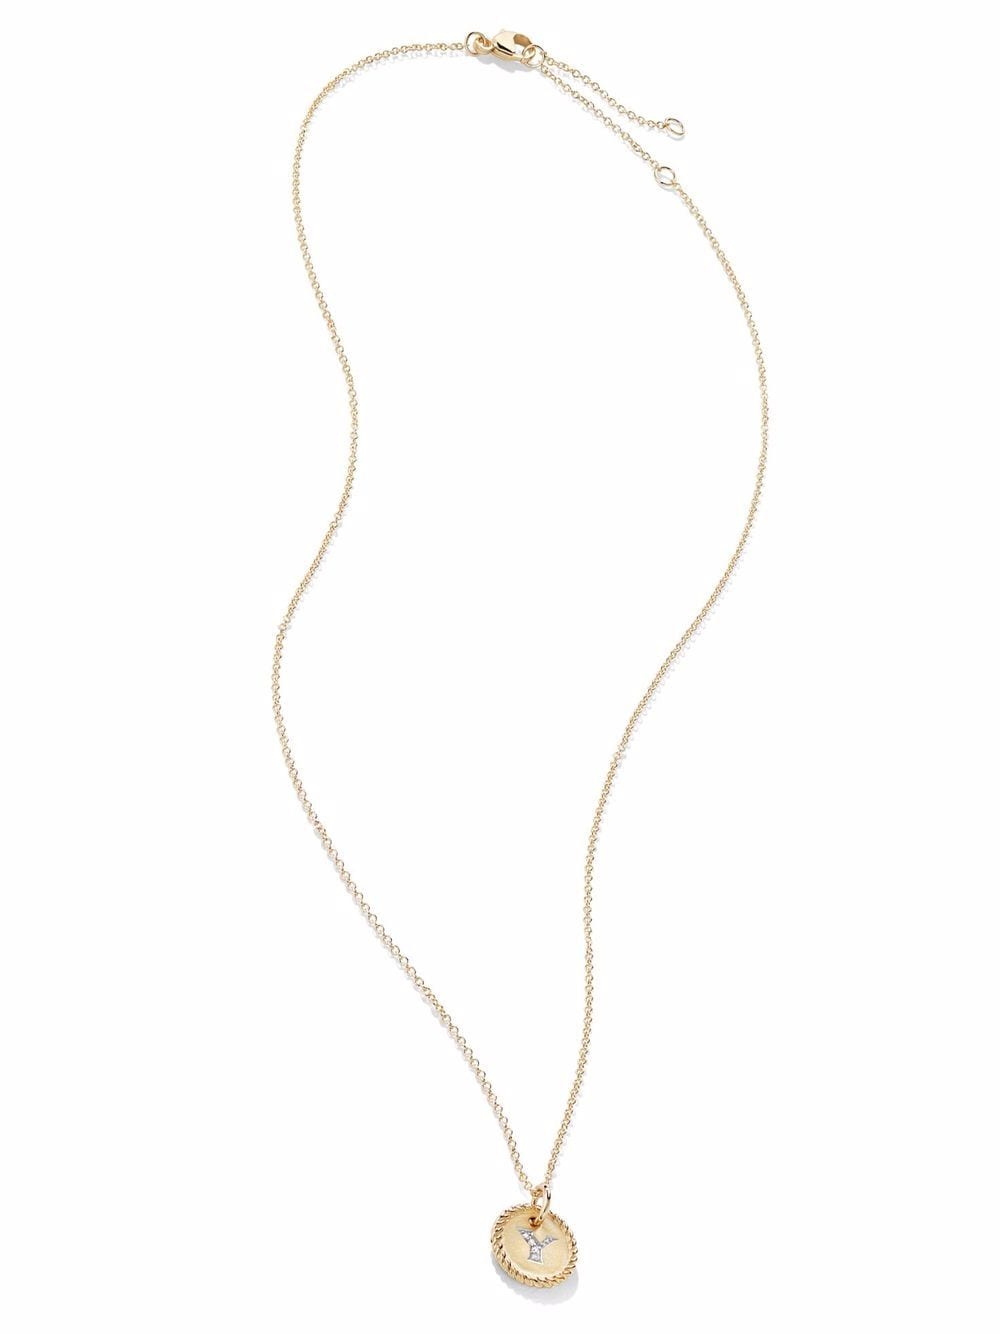 18KT YELLOW GOLD INITIAL Y DIAMOND CHARM NECKLACE